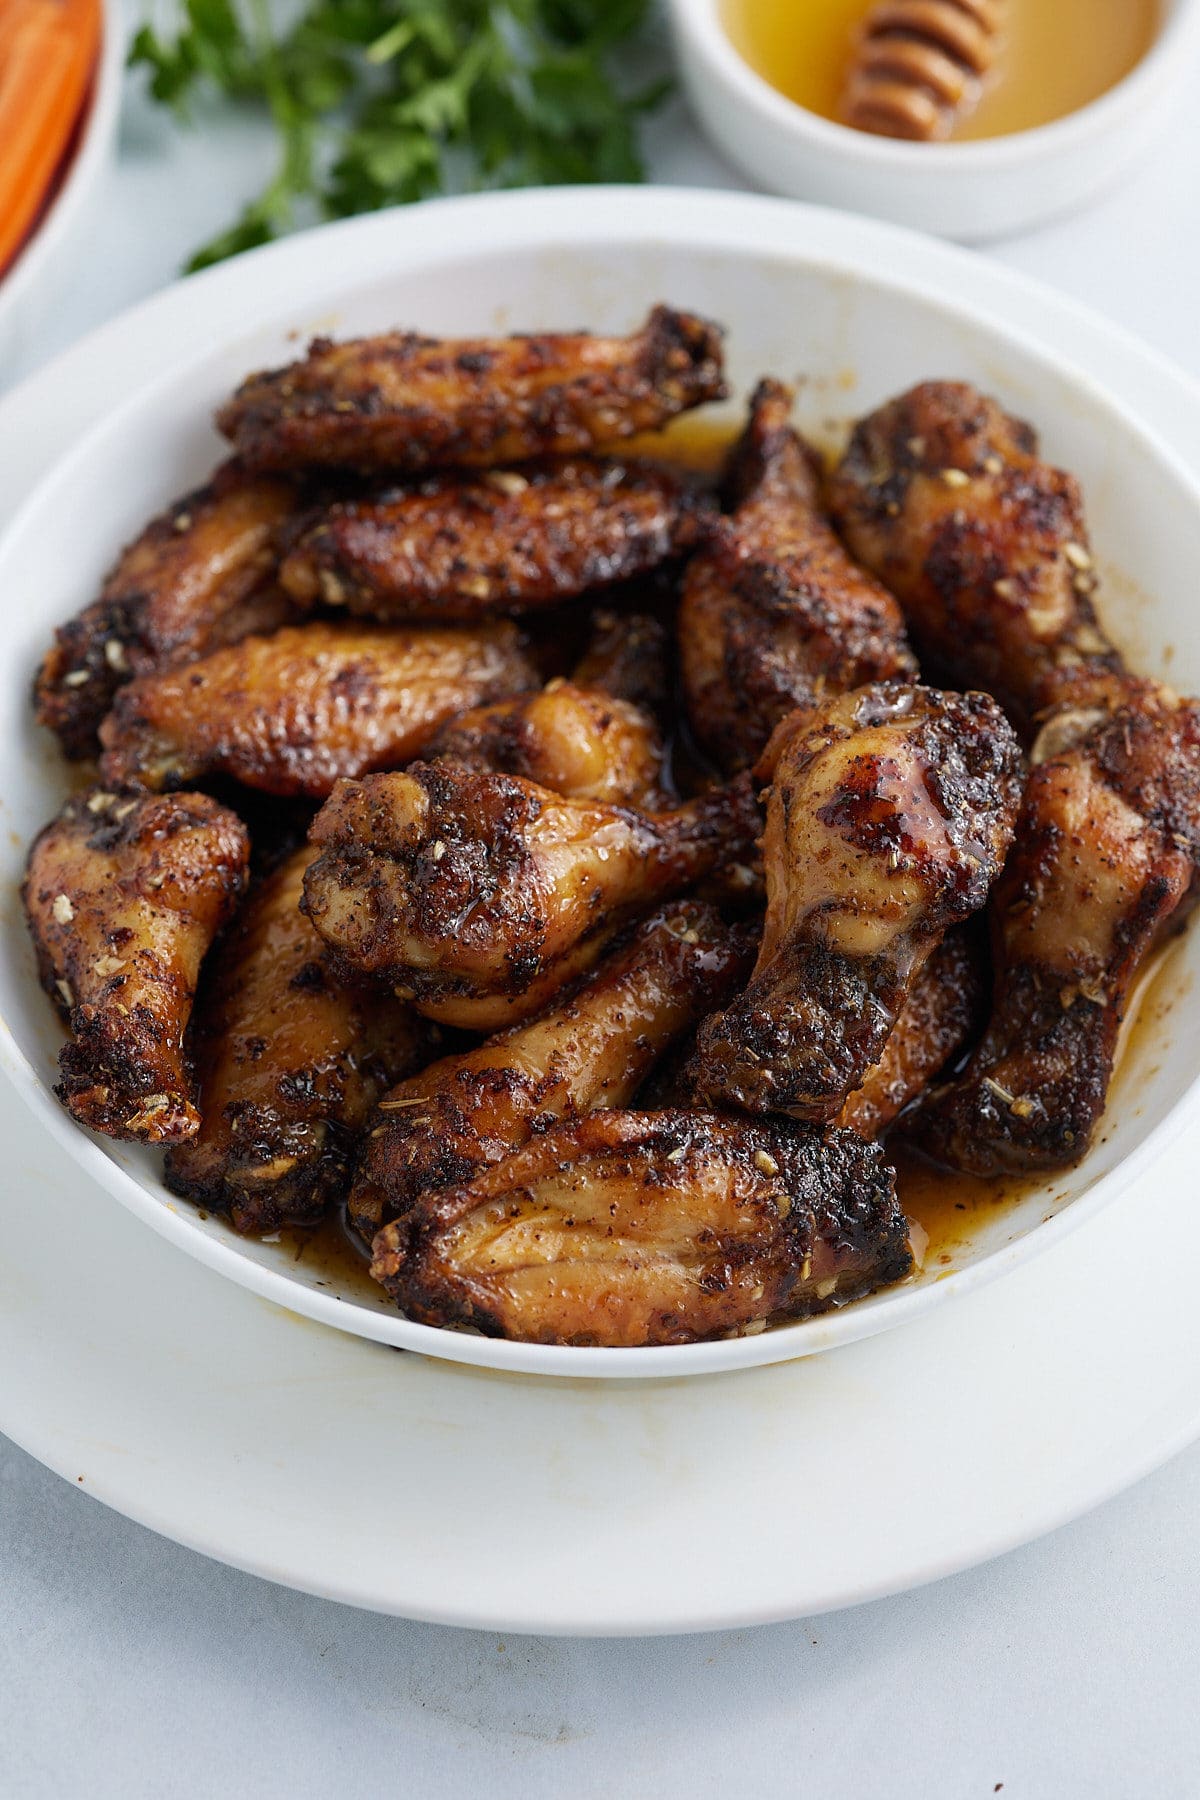 Cooked honey garlic chicken wings served in a white bowl.